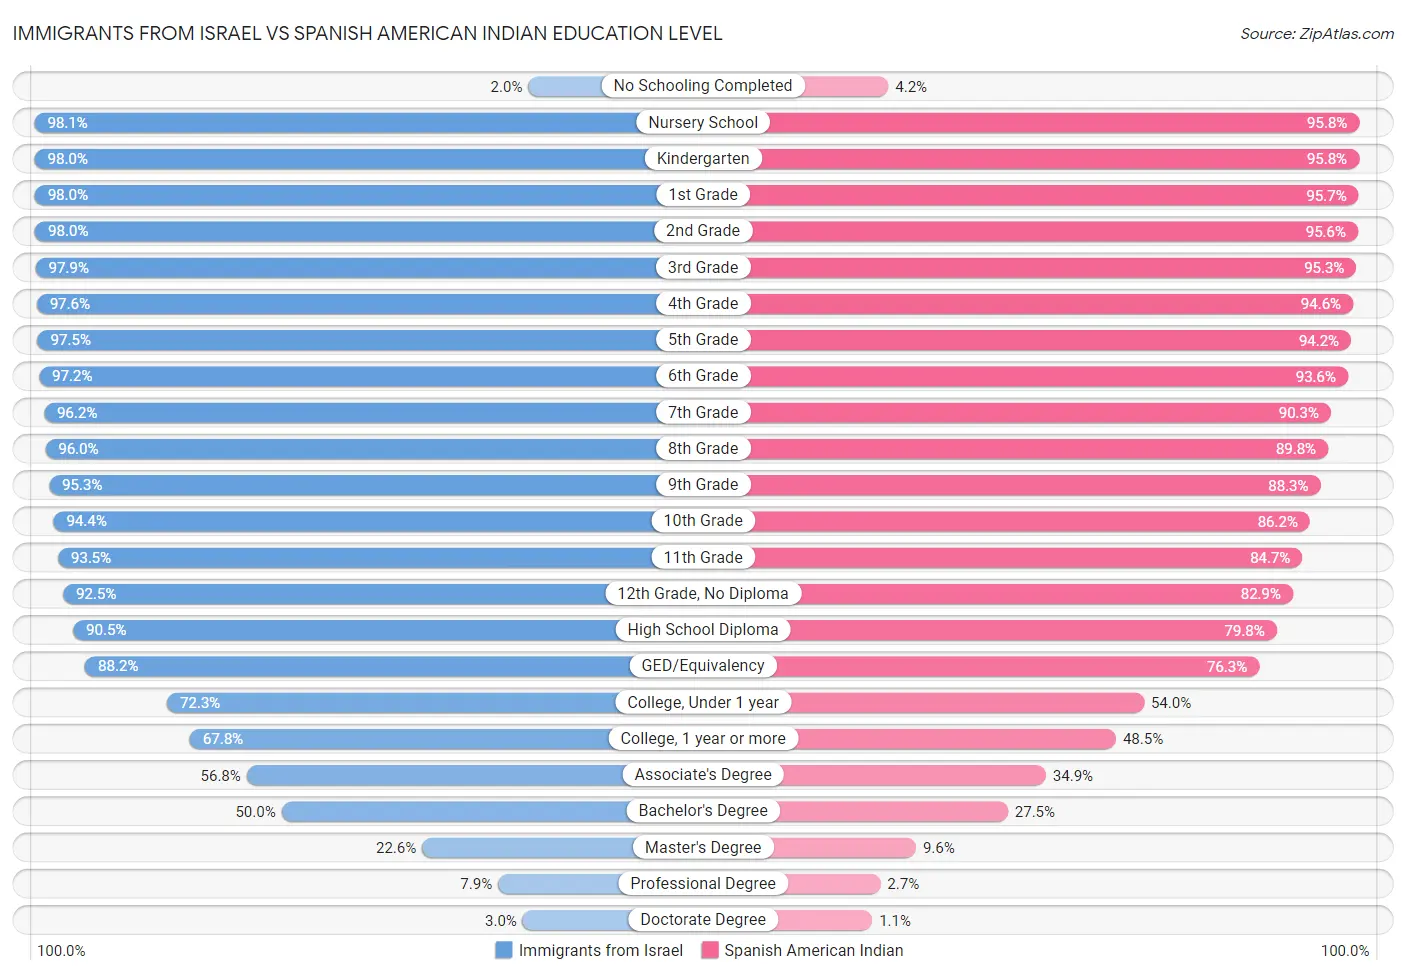 Immigrants from Israel vs Spanish American Indian Education Level